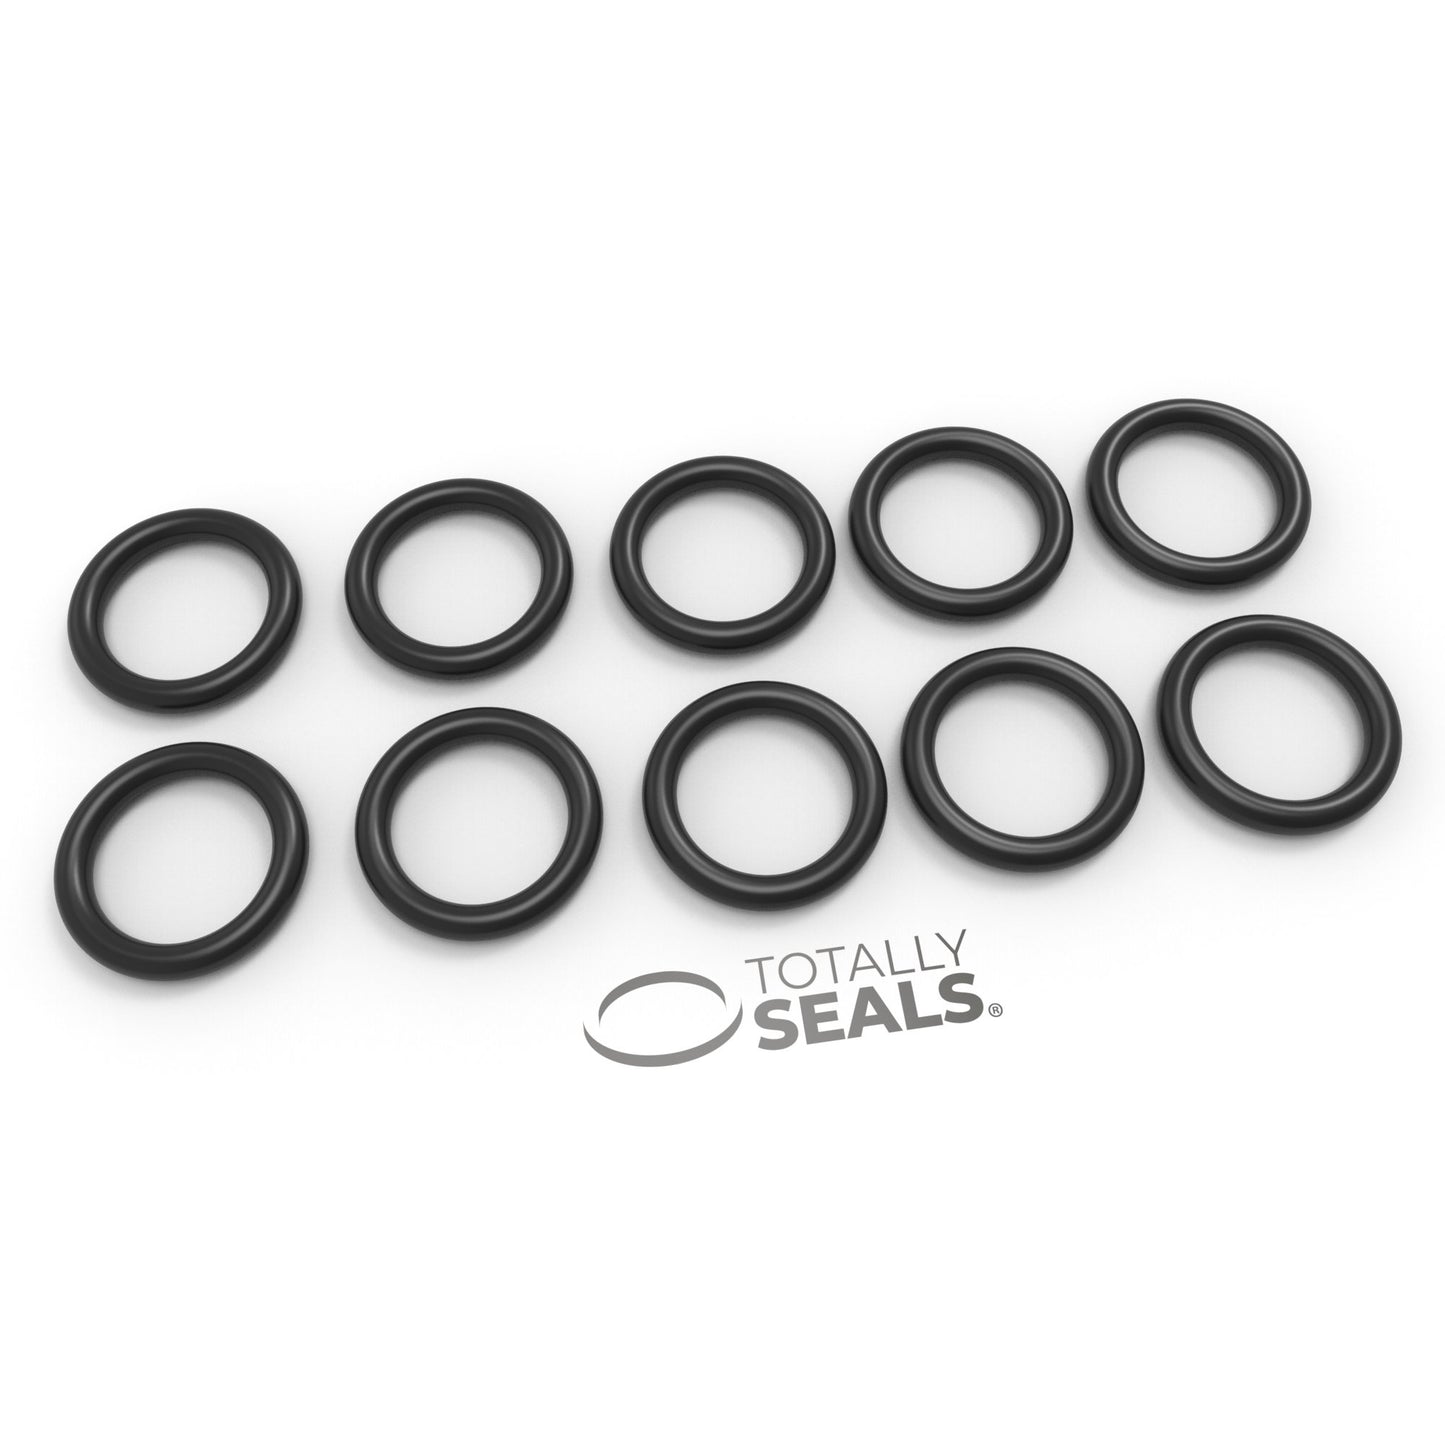 3/8" x 1/16" (BS012) Imperial Nitrile O-Rings - Totally Seals®